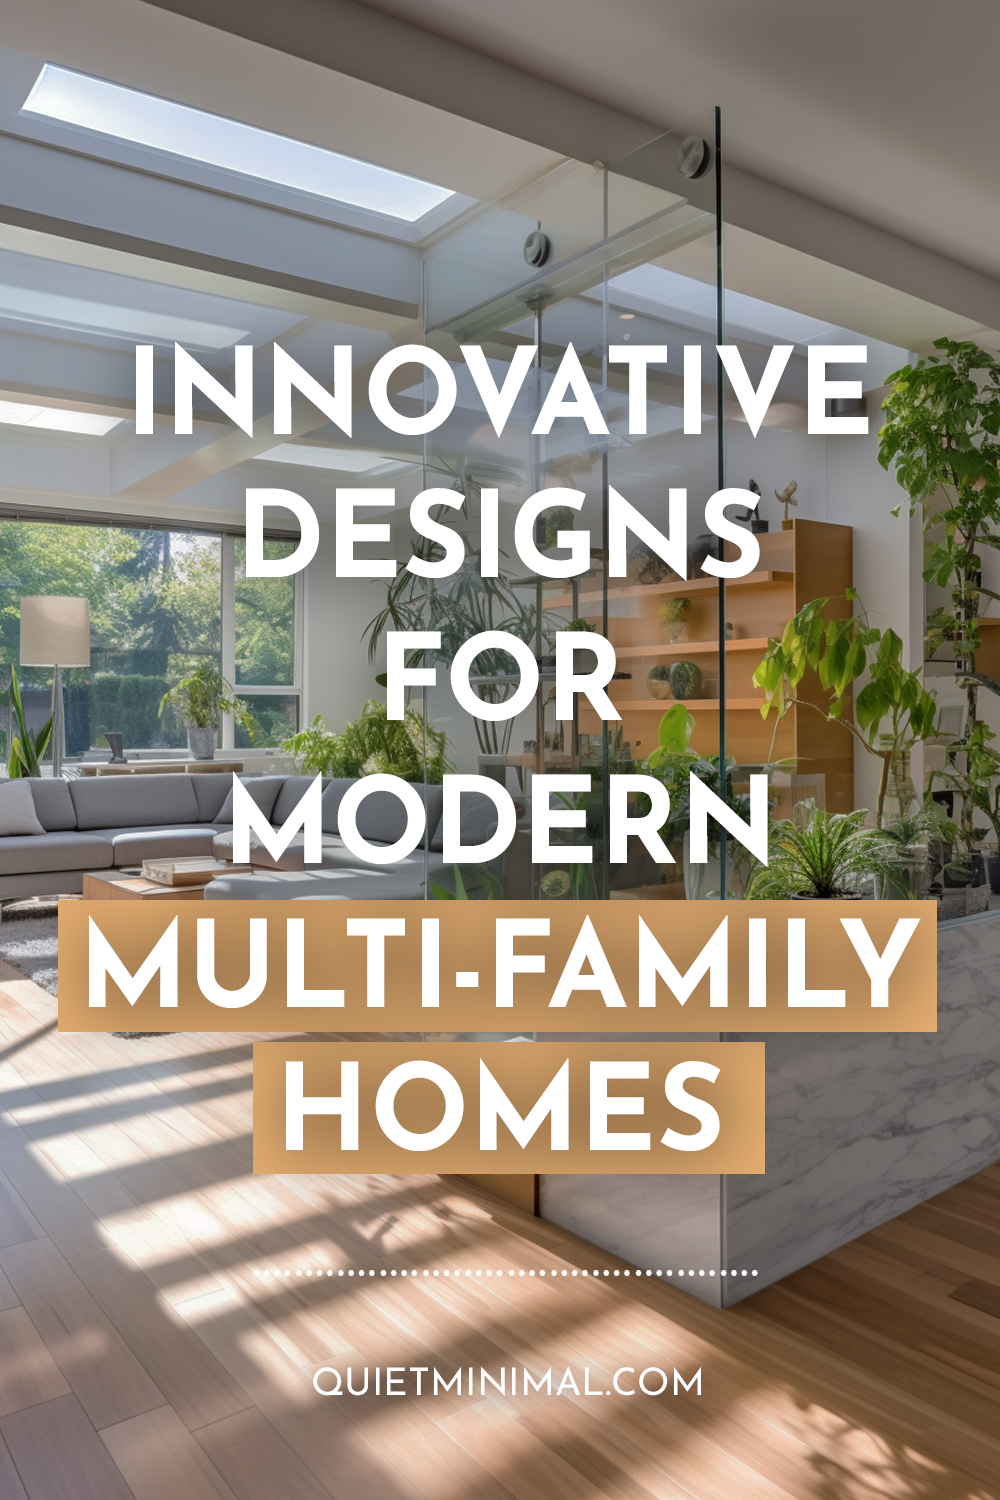 Innovative designs for maximizing space in modern multi-family homes.